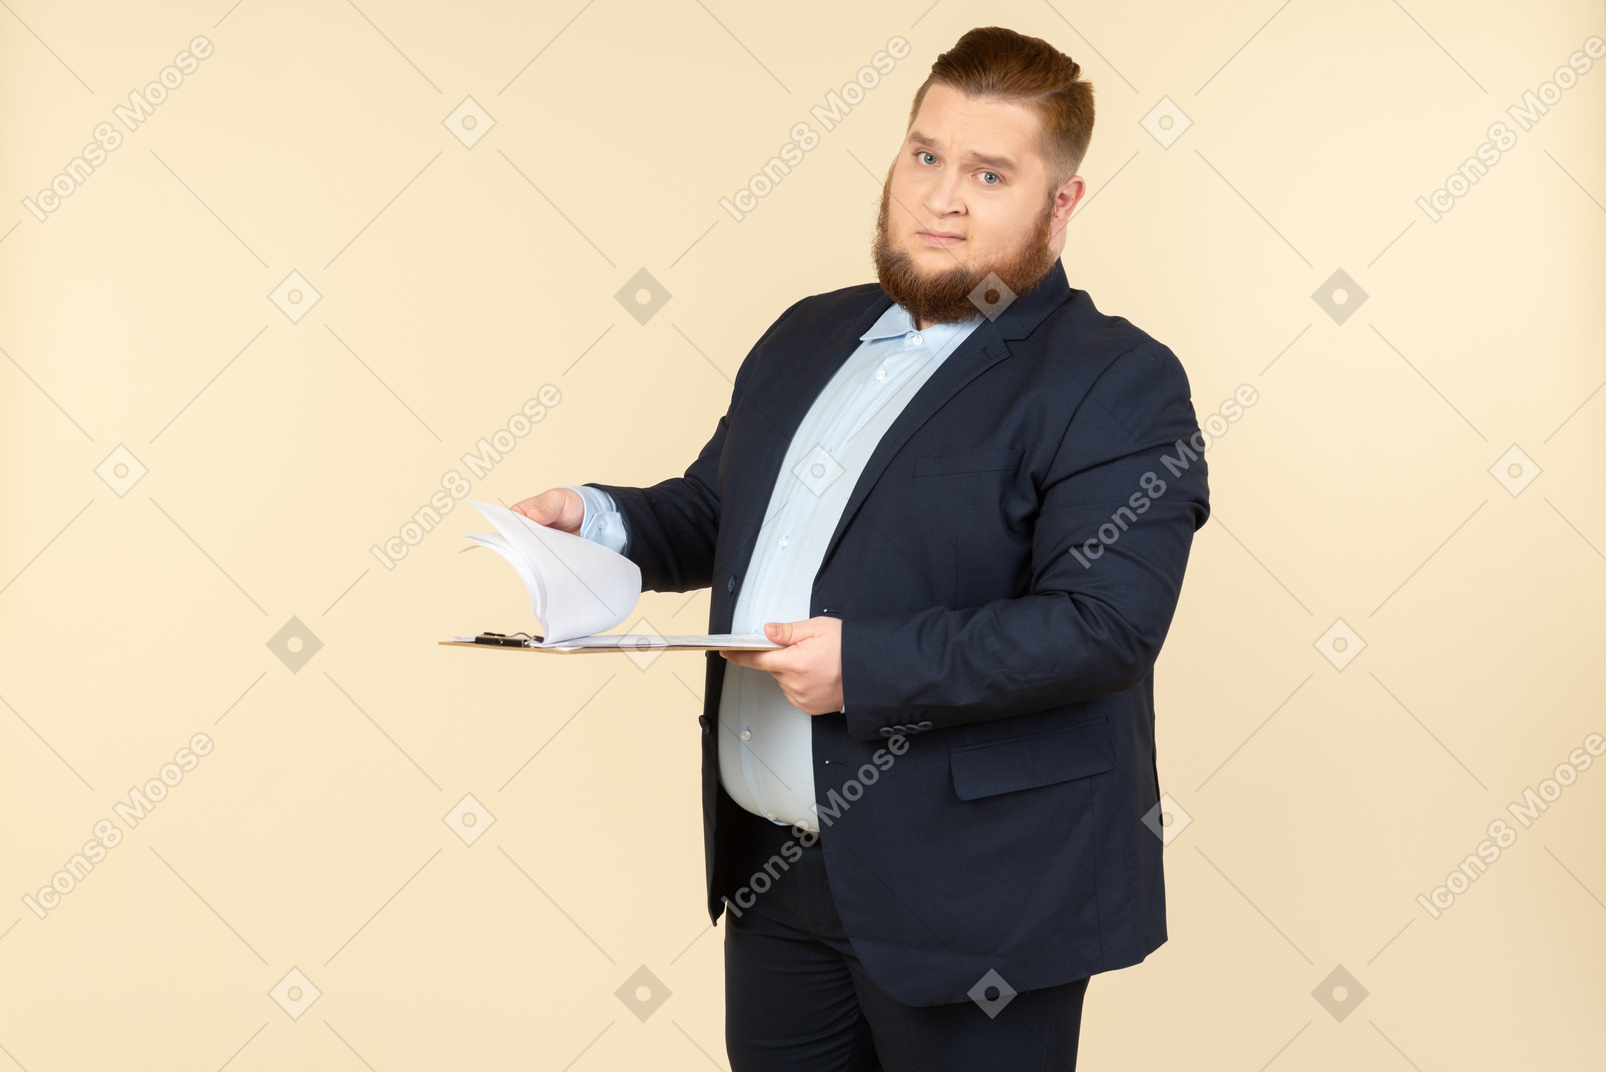 Overweight male office worker revising papers